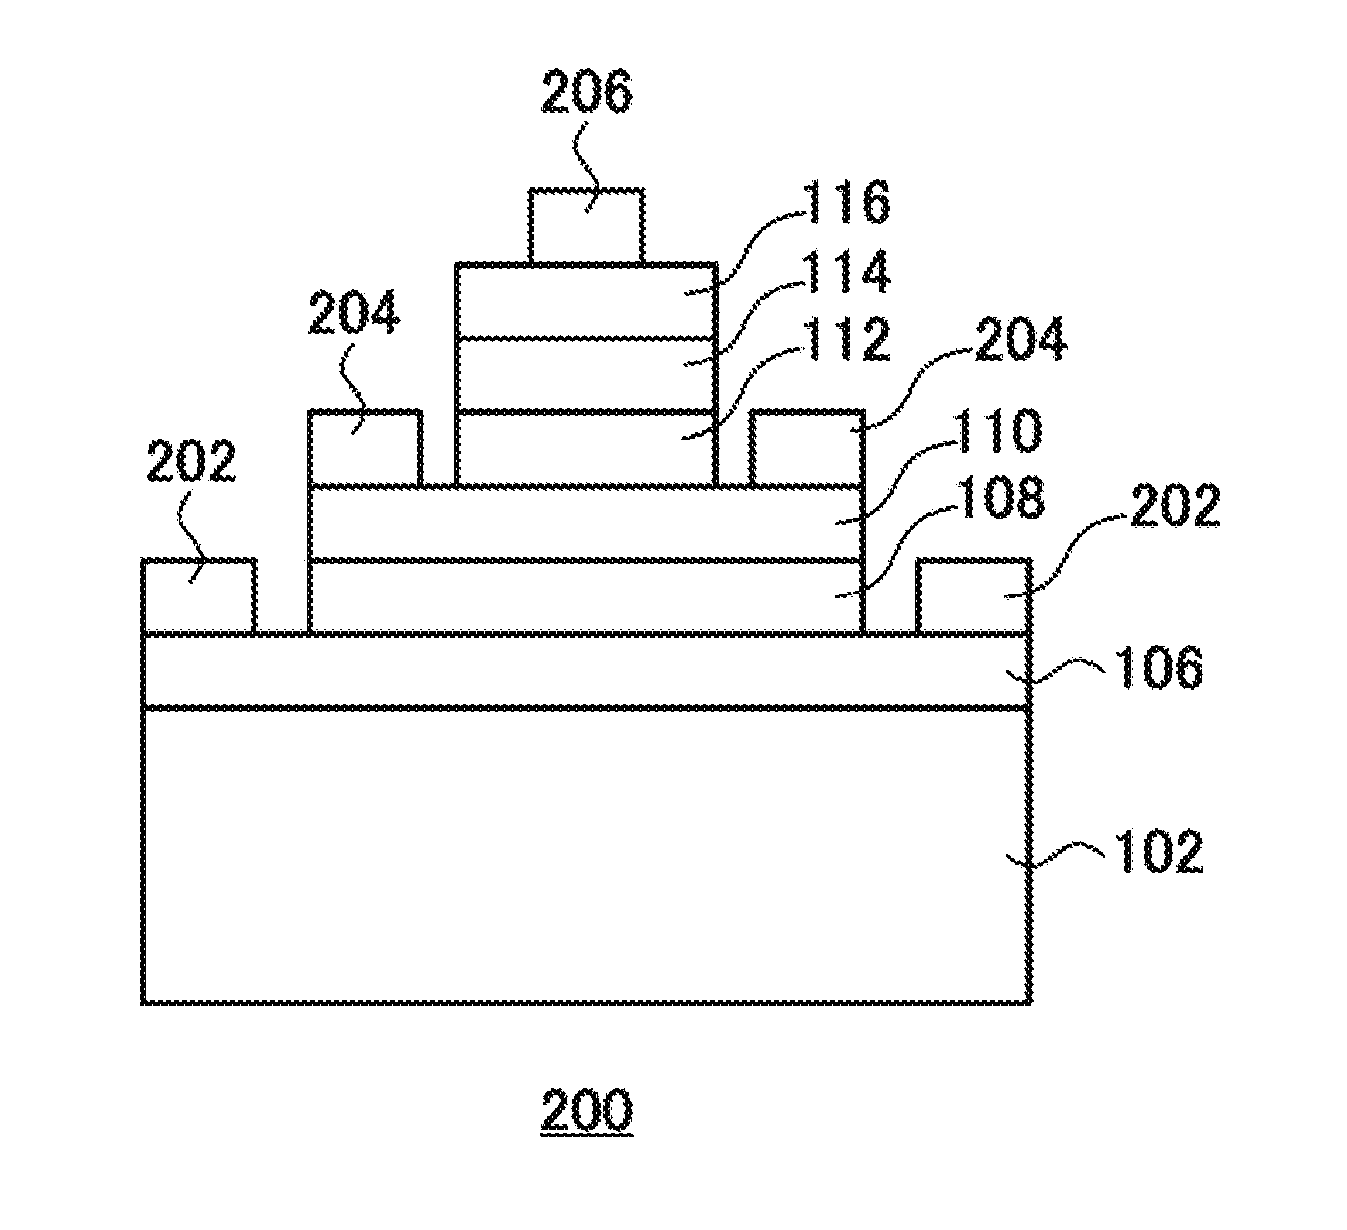 Semiconductor wafer, method of producing semiconductor wafer, and heterojunction bipolar transistor